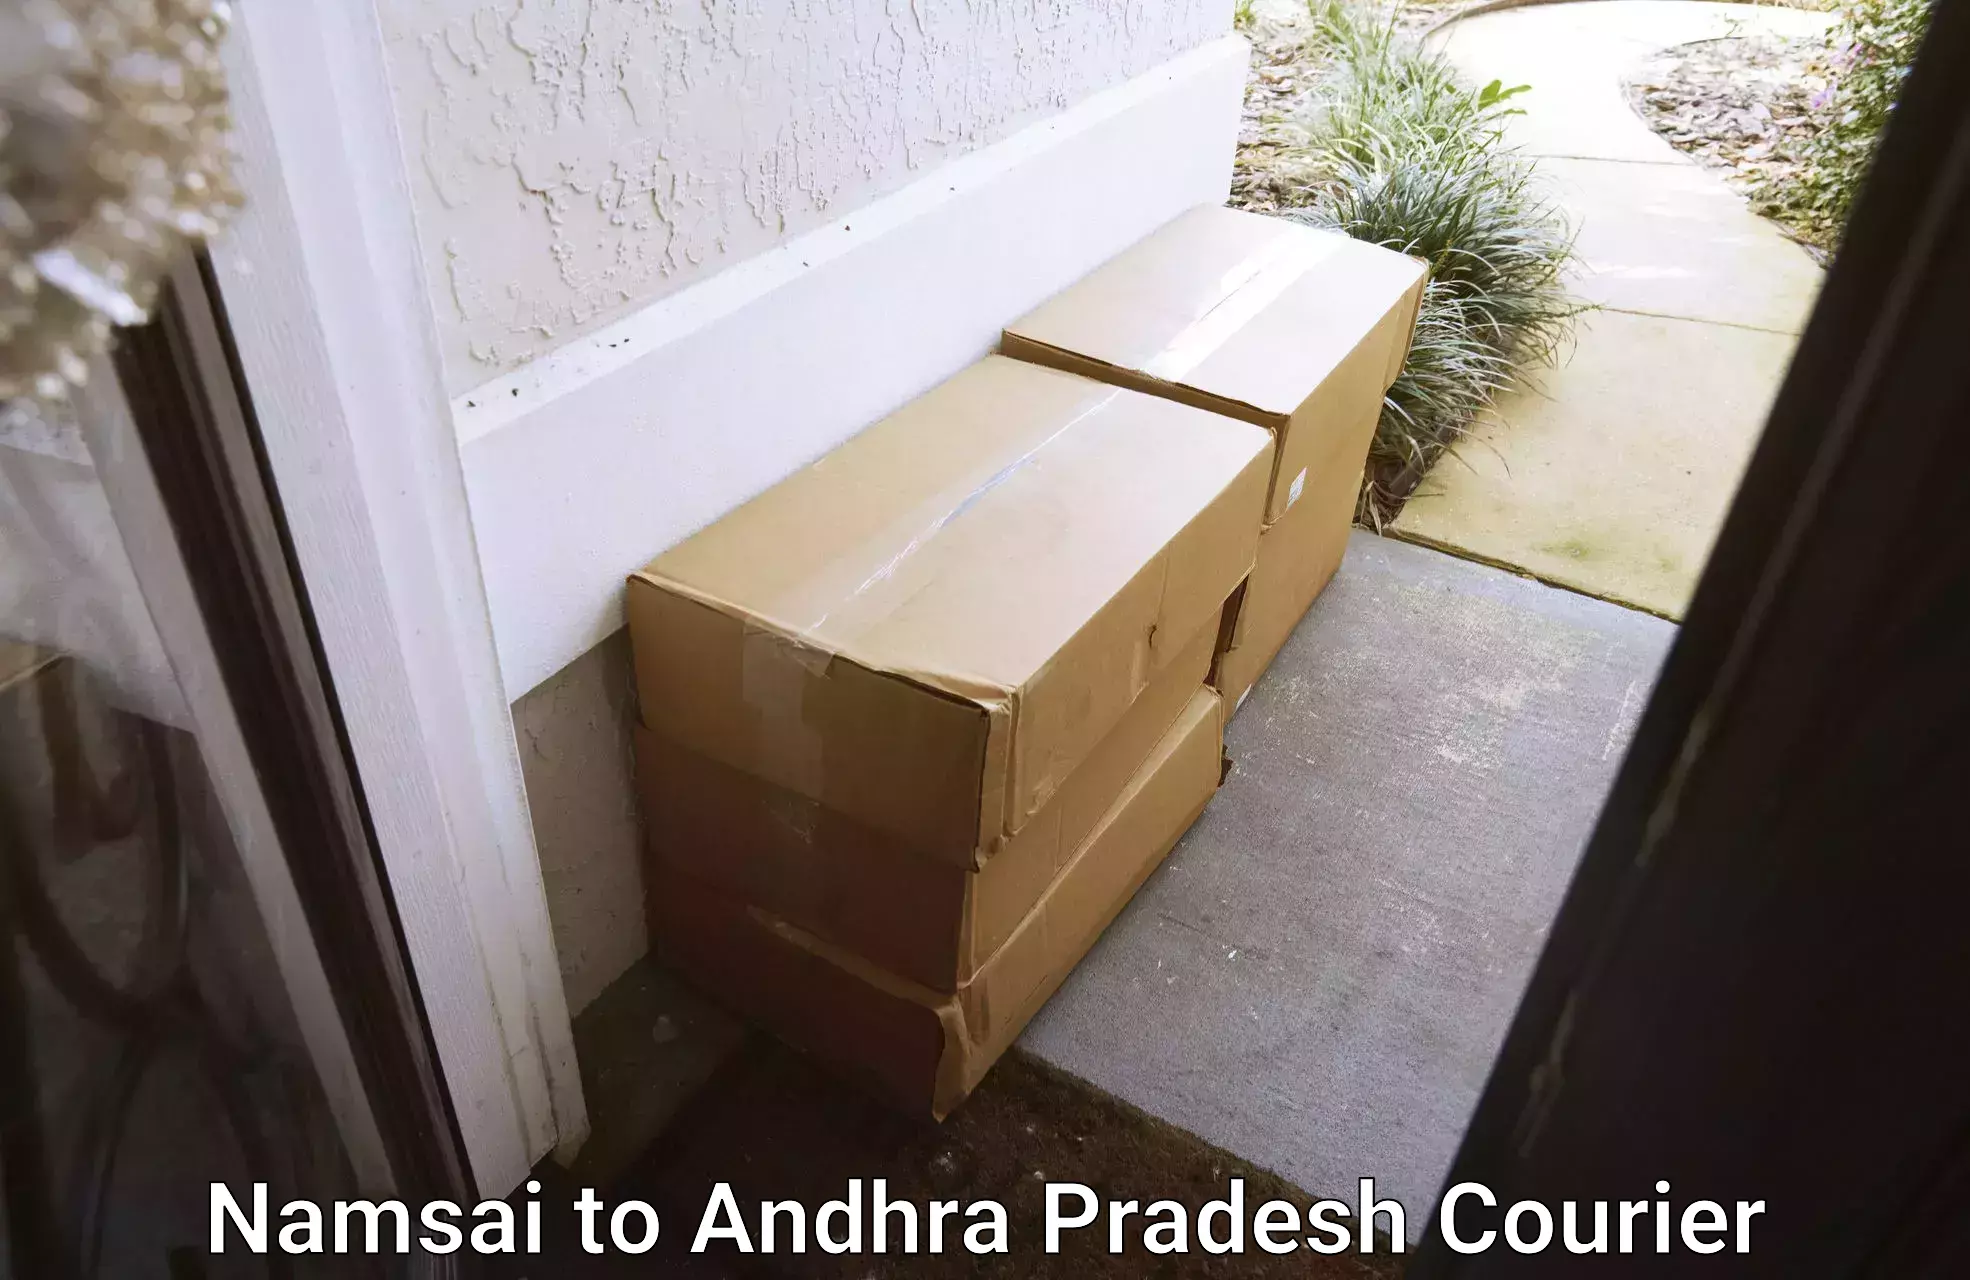 Easy access courier services Namsai to Palakollu